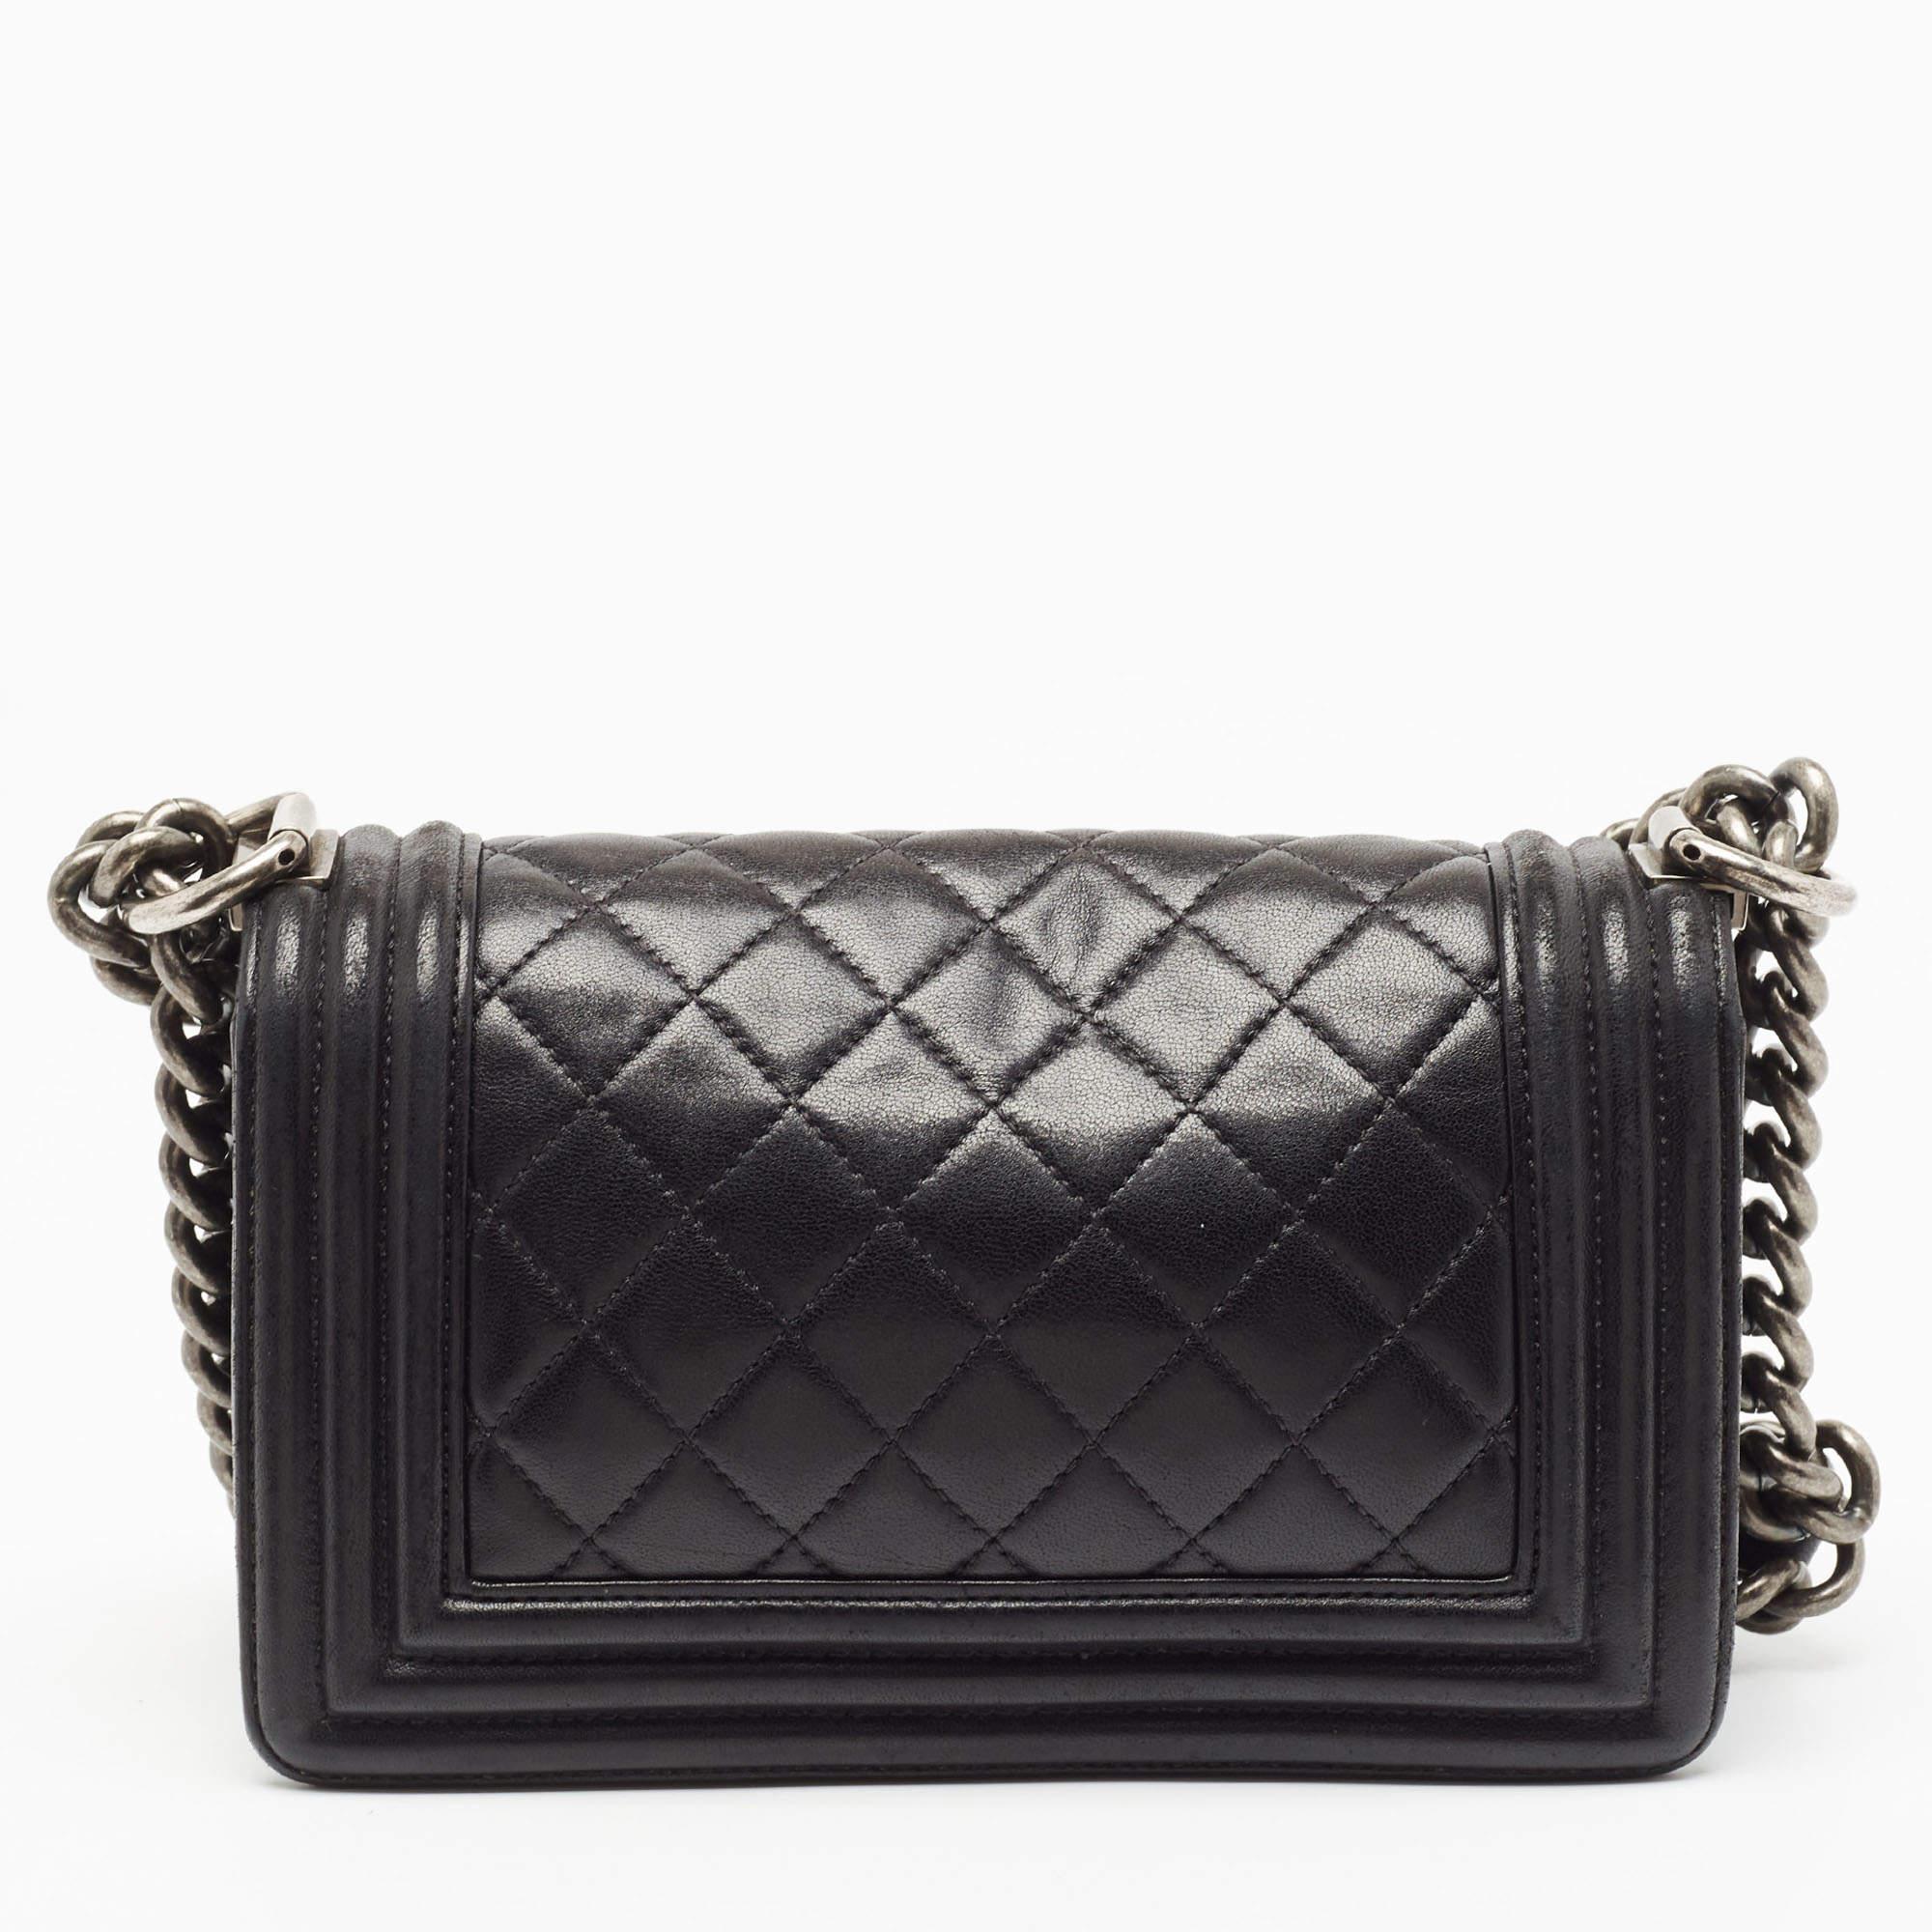 Chanel Black Quilted Leather Small Boy Bag 4